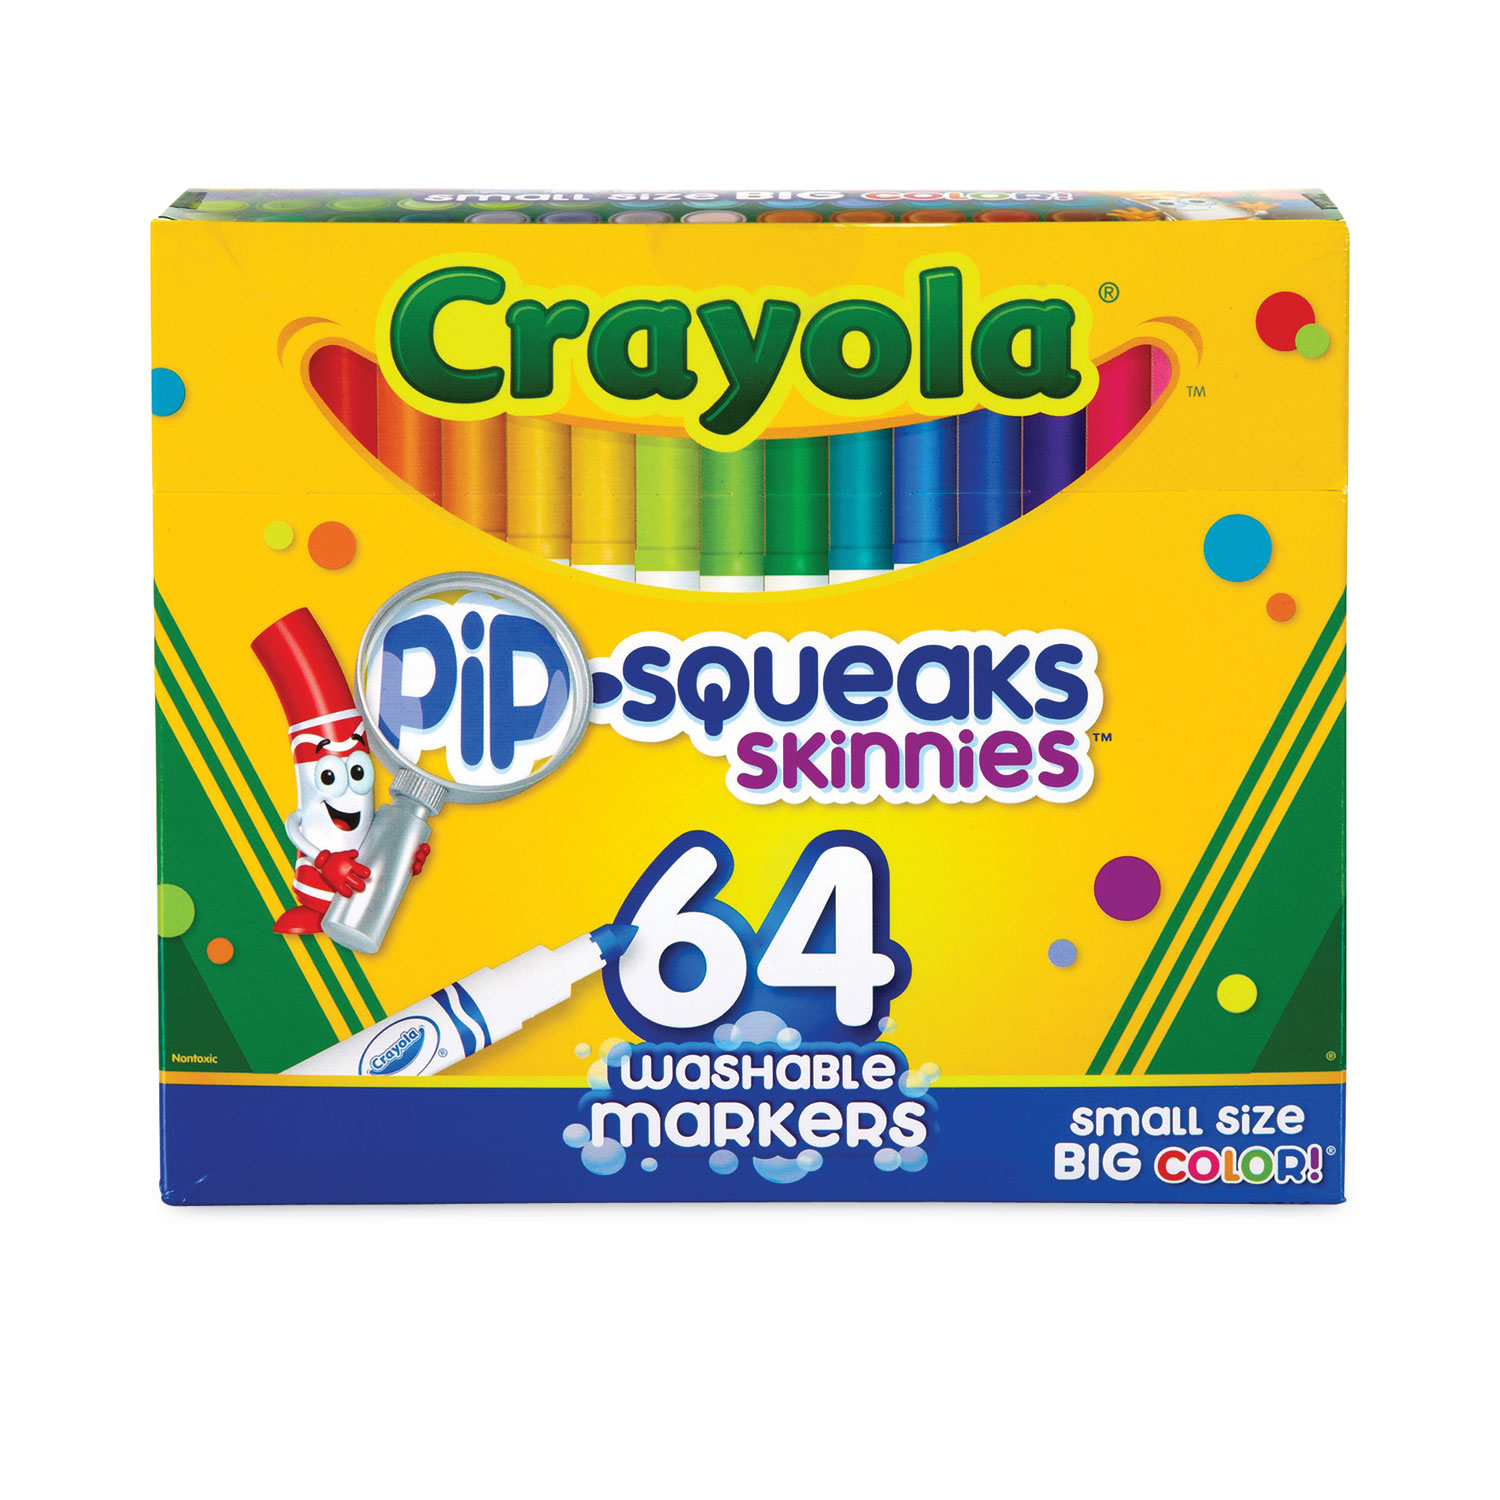 Crayola My First Washable Toddler Crayons, Tripod Grip, Gift, 8 Count